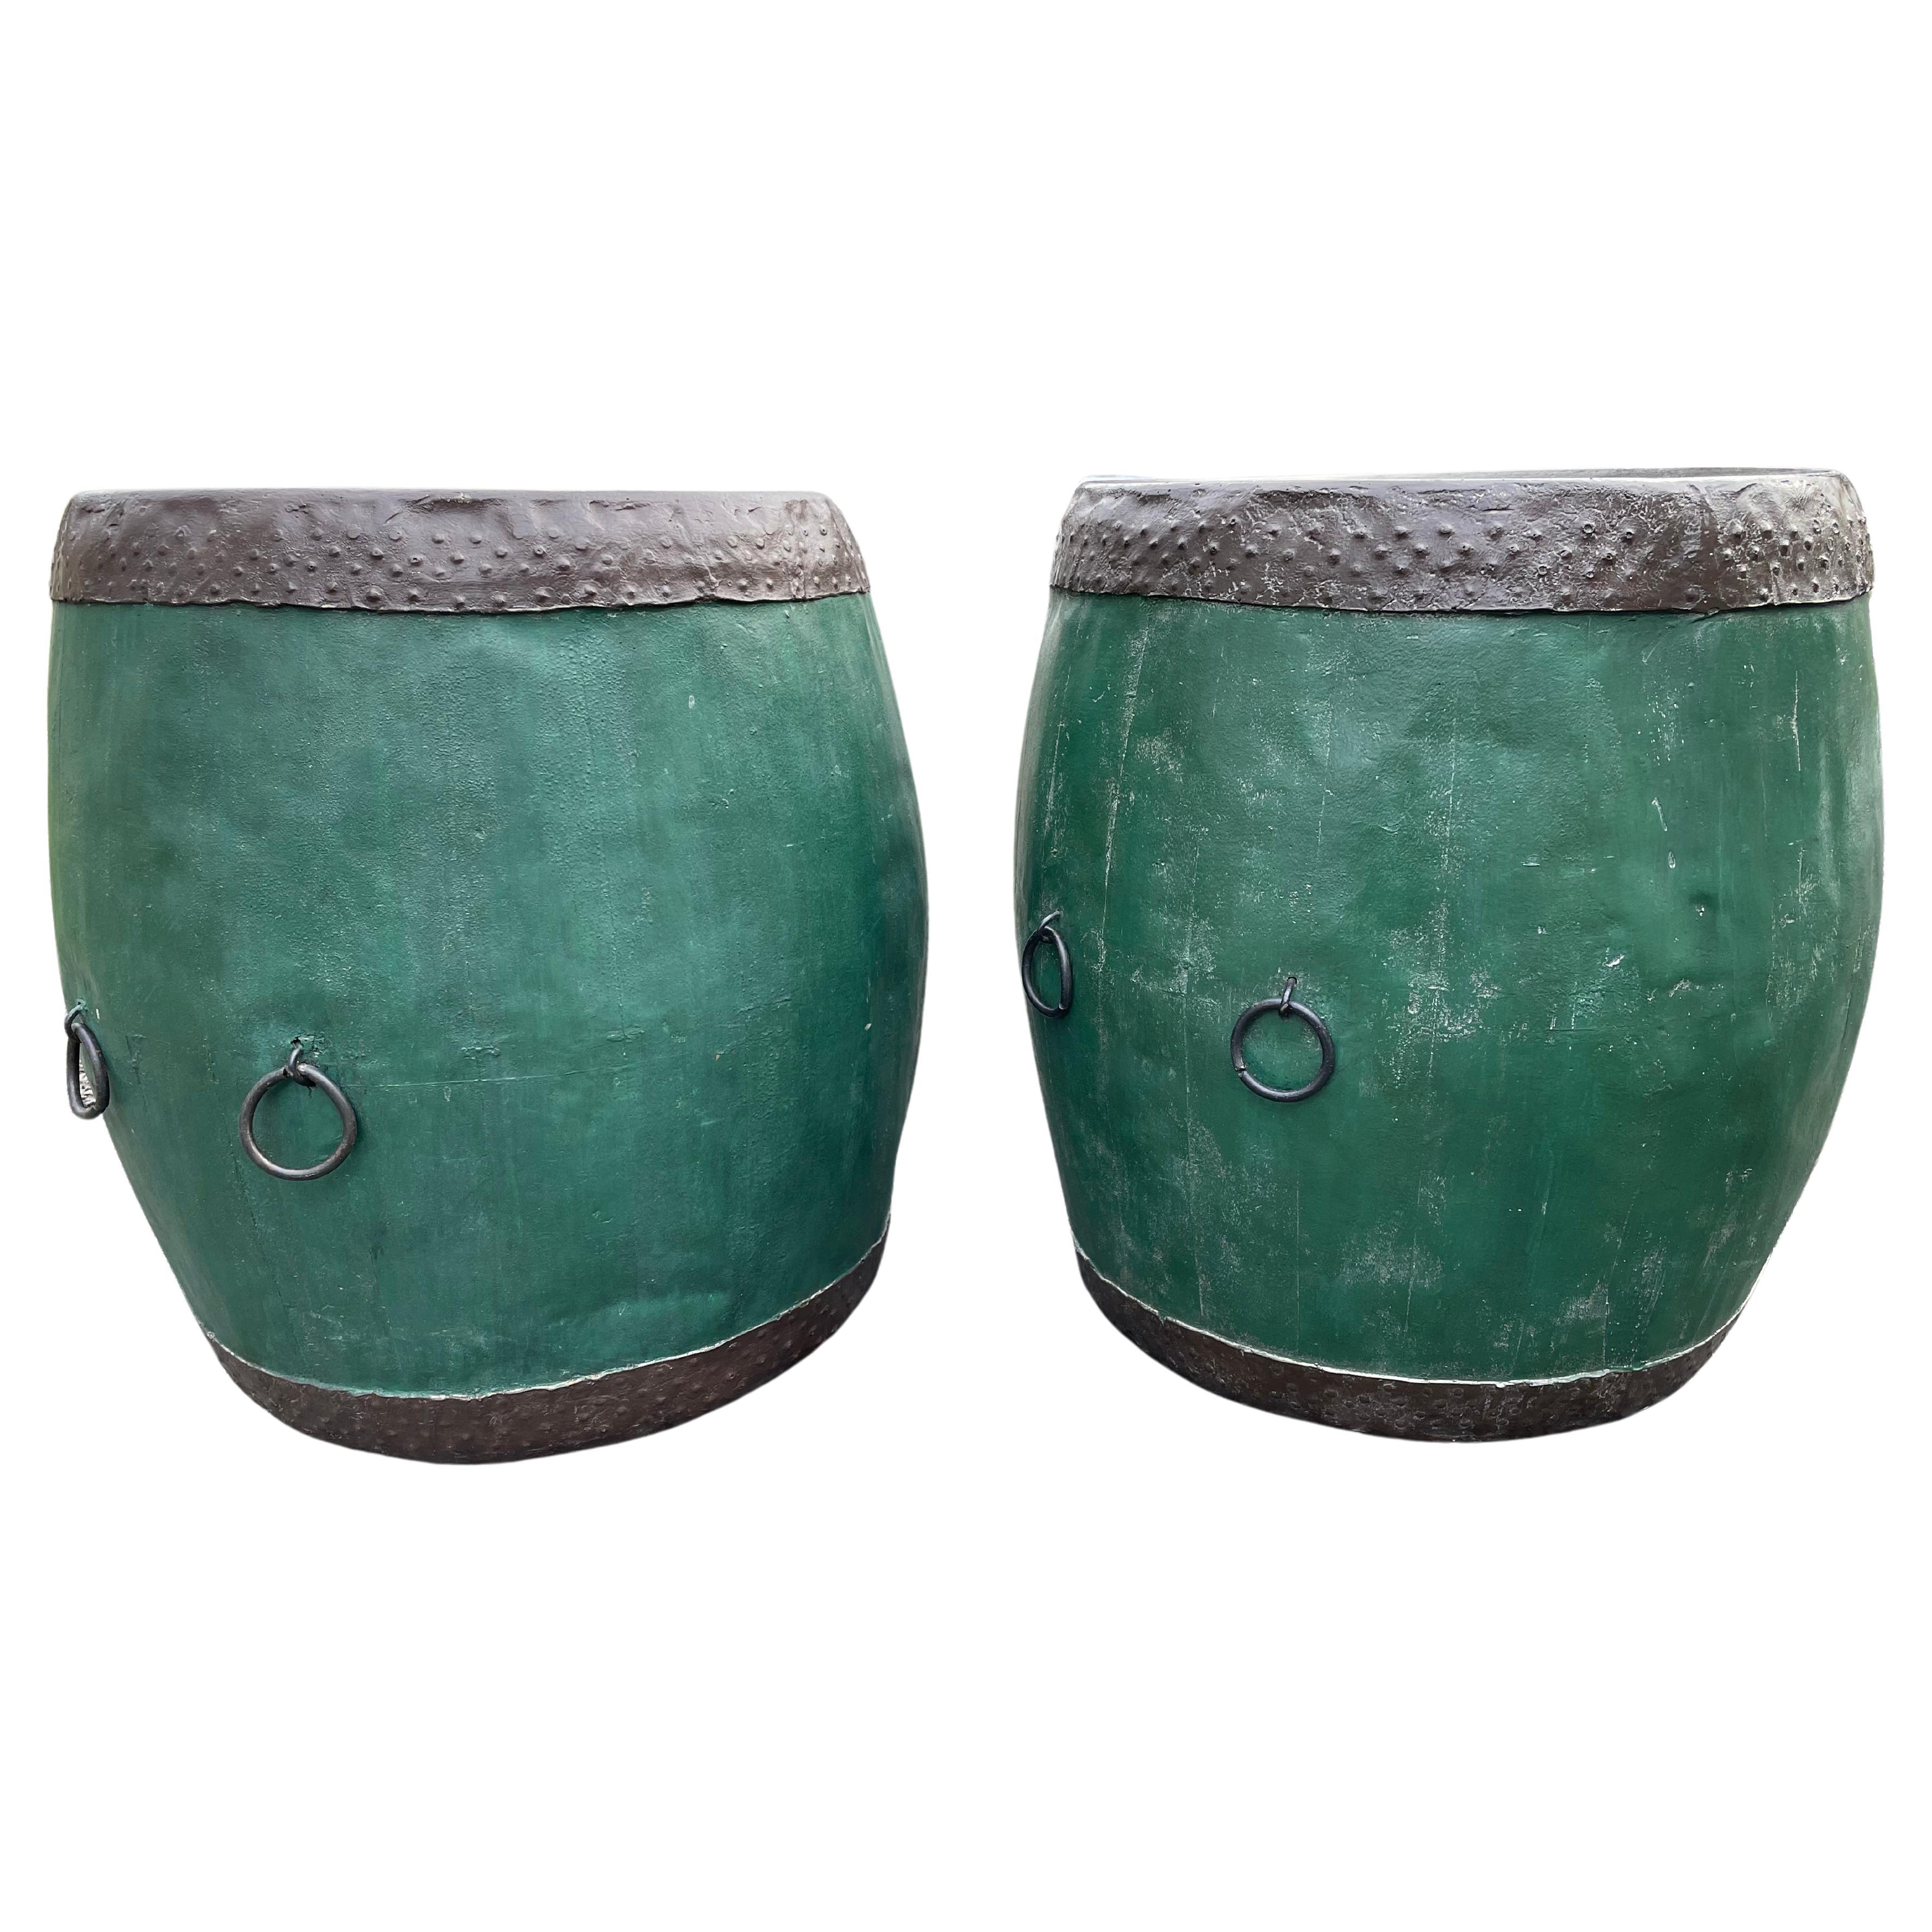 Fabulous Pair of Green Wood & Metal Chinese Drum Side Tables